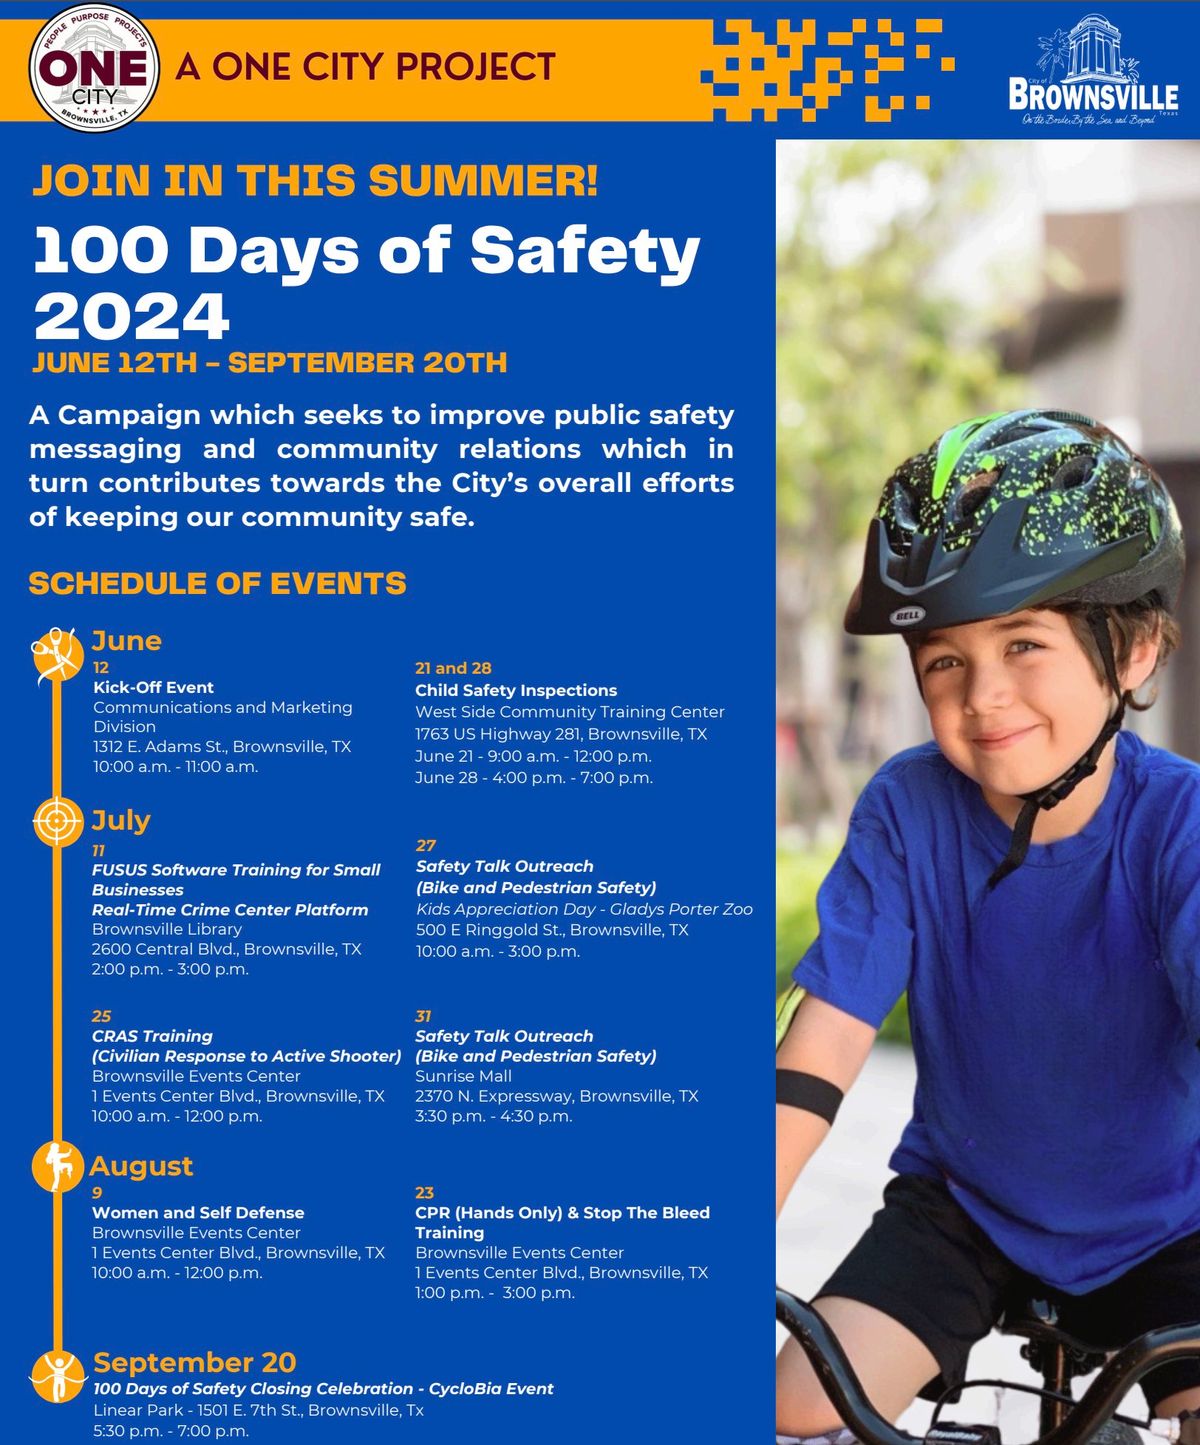 100 Days of Safety: FUSUS Software Training for Small Businesses